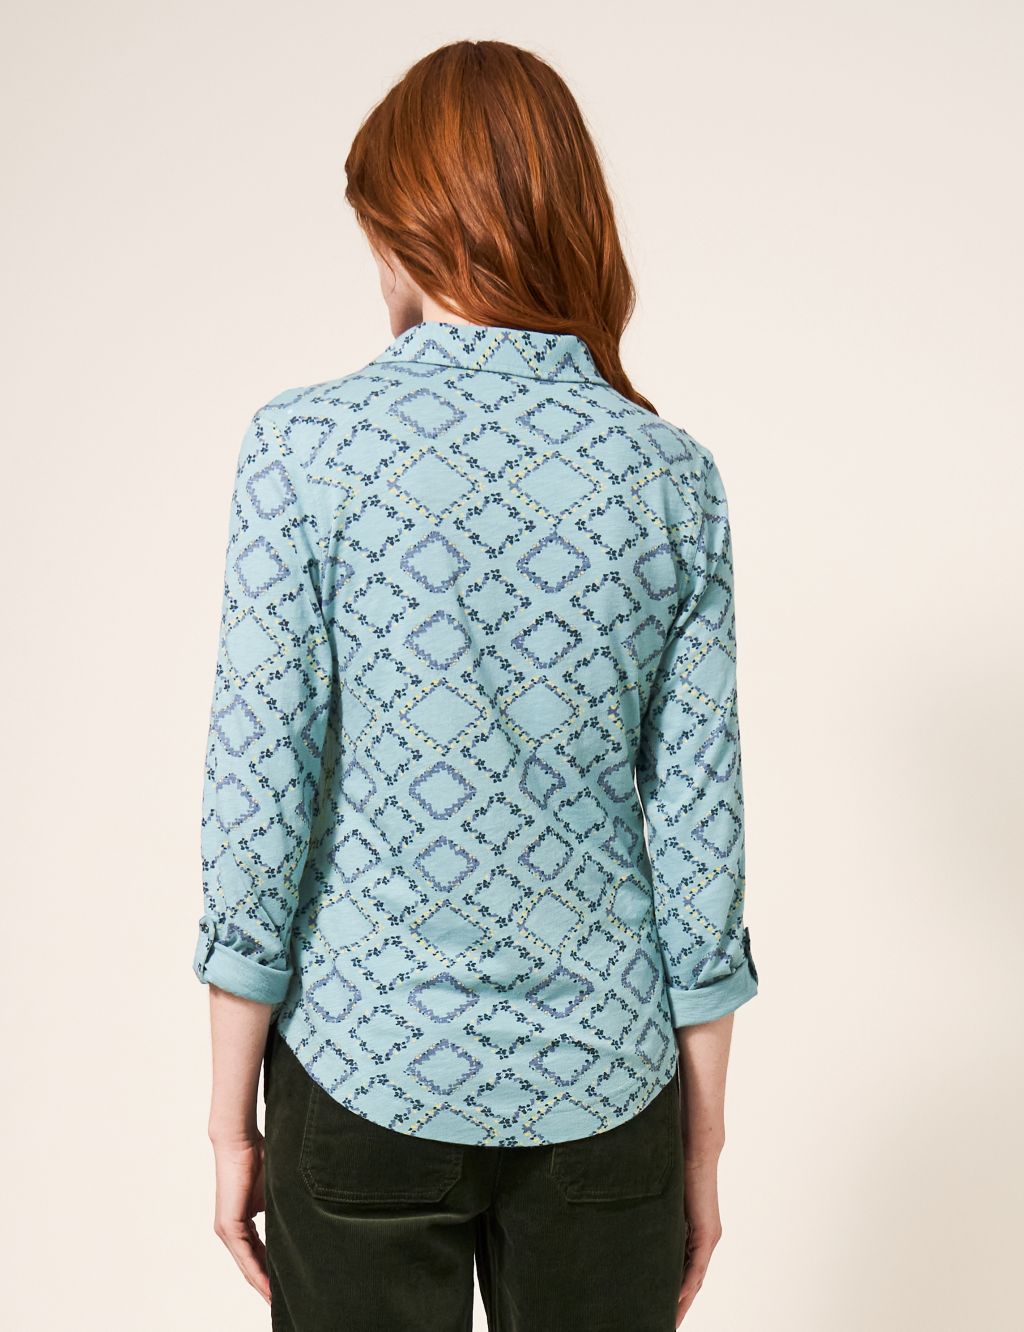 Pure Cotton Geometric Floral Collared Shirt image 3